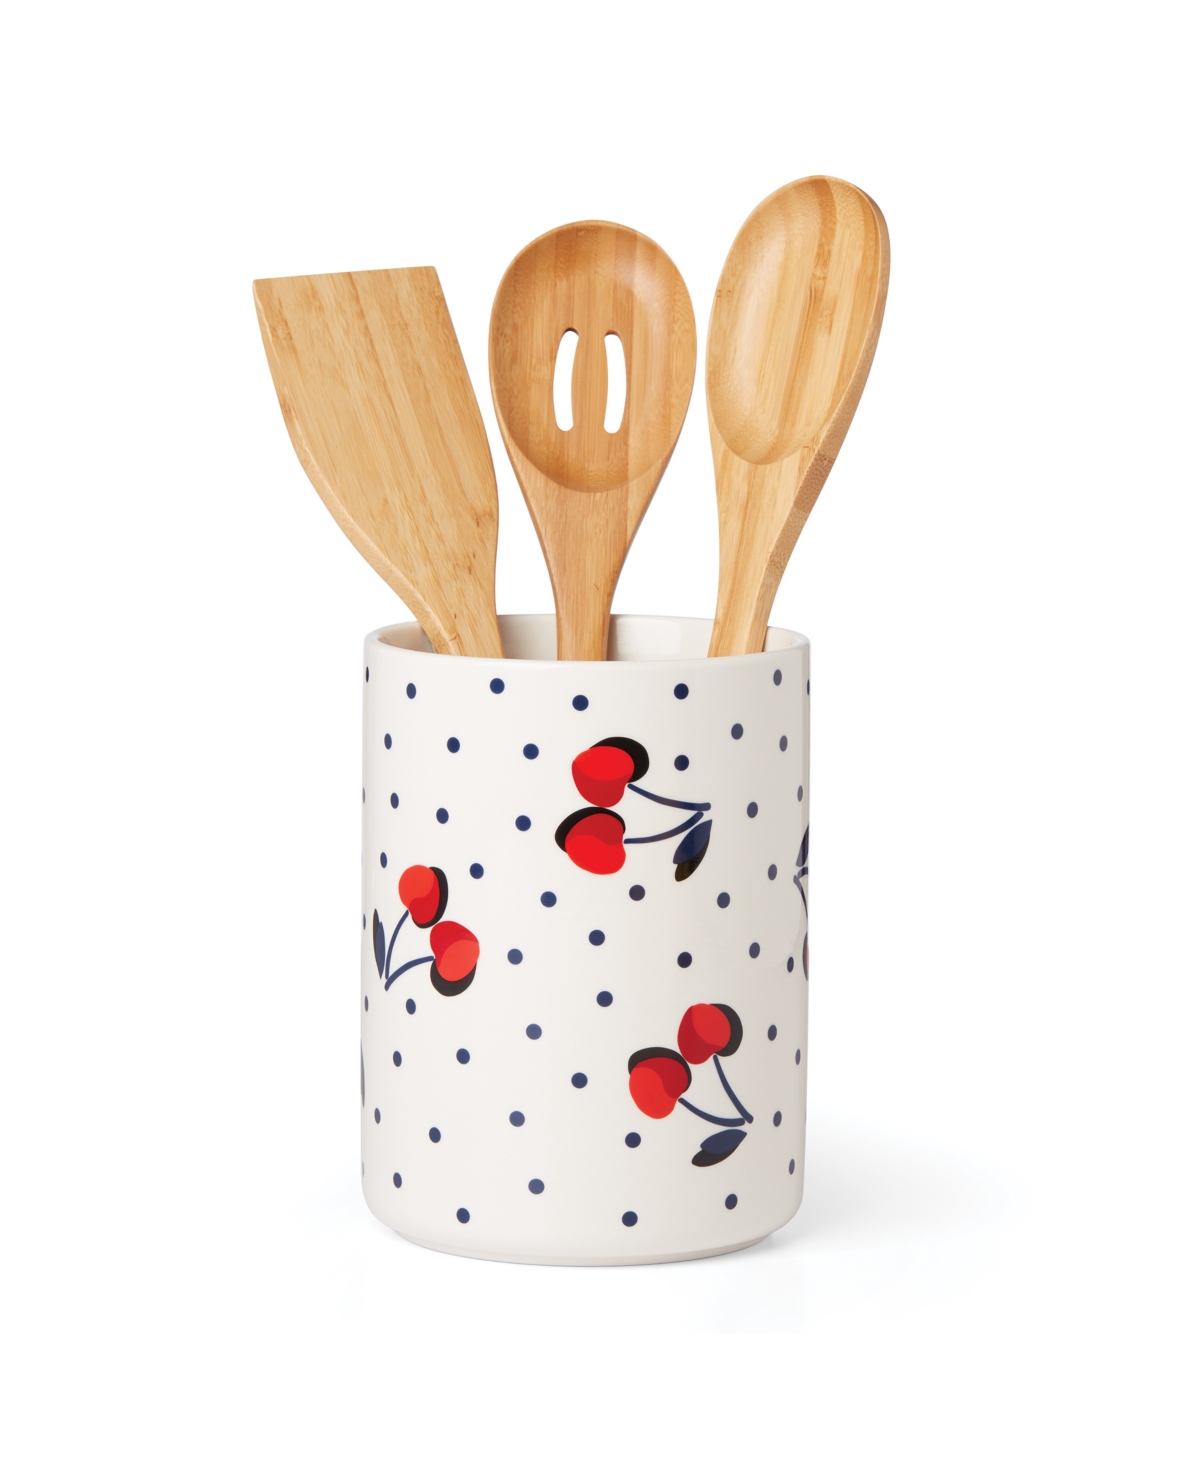 Kate Spade Vintage Cherry Dot Utensil Crock With Utensils In Parchment